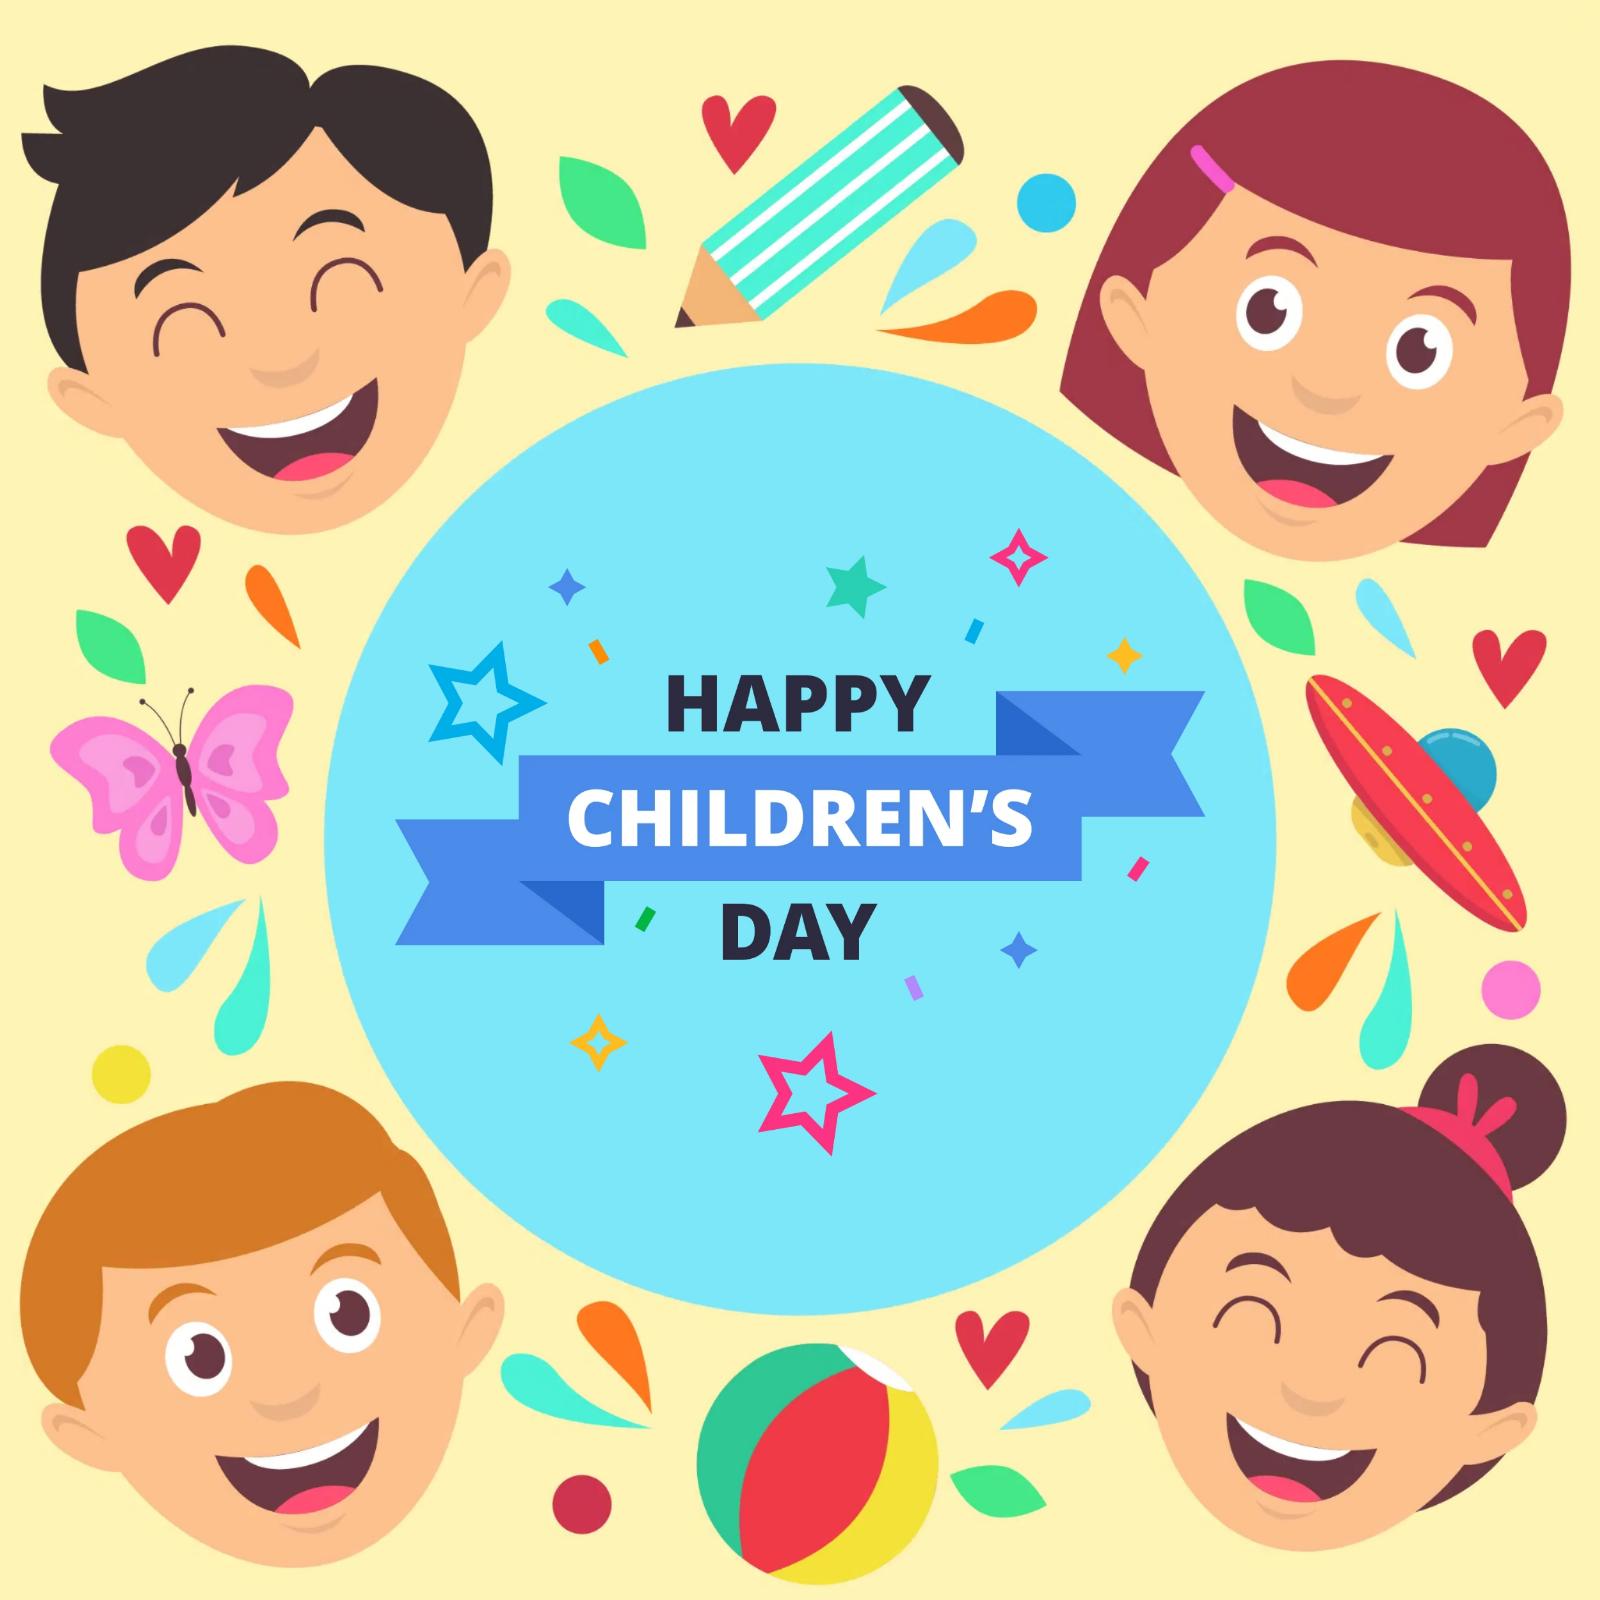 Happy Childrens Day Wishes Images